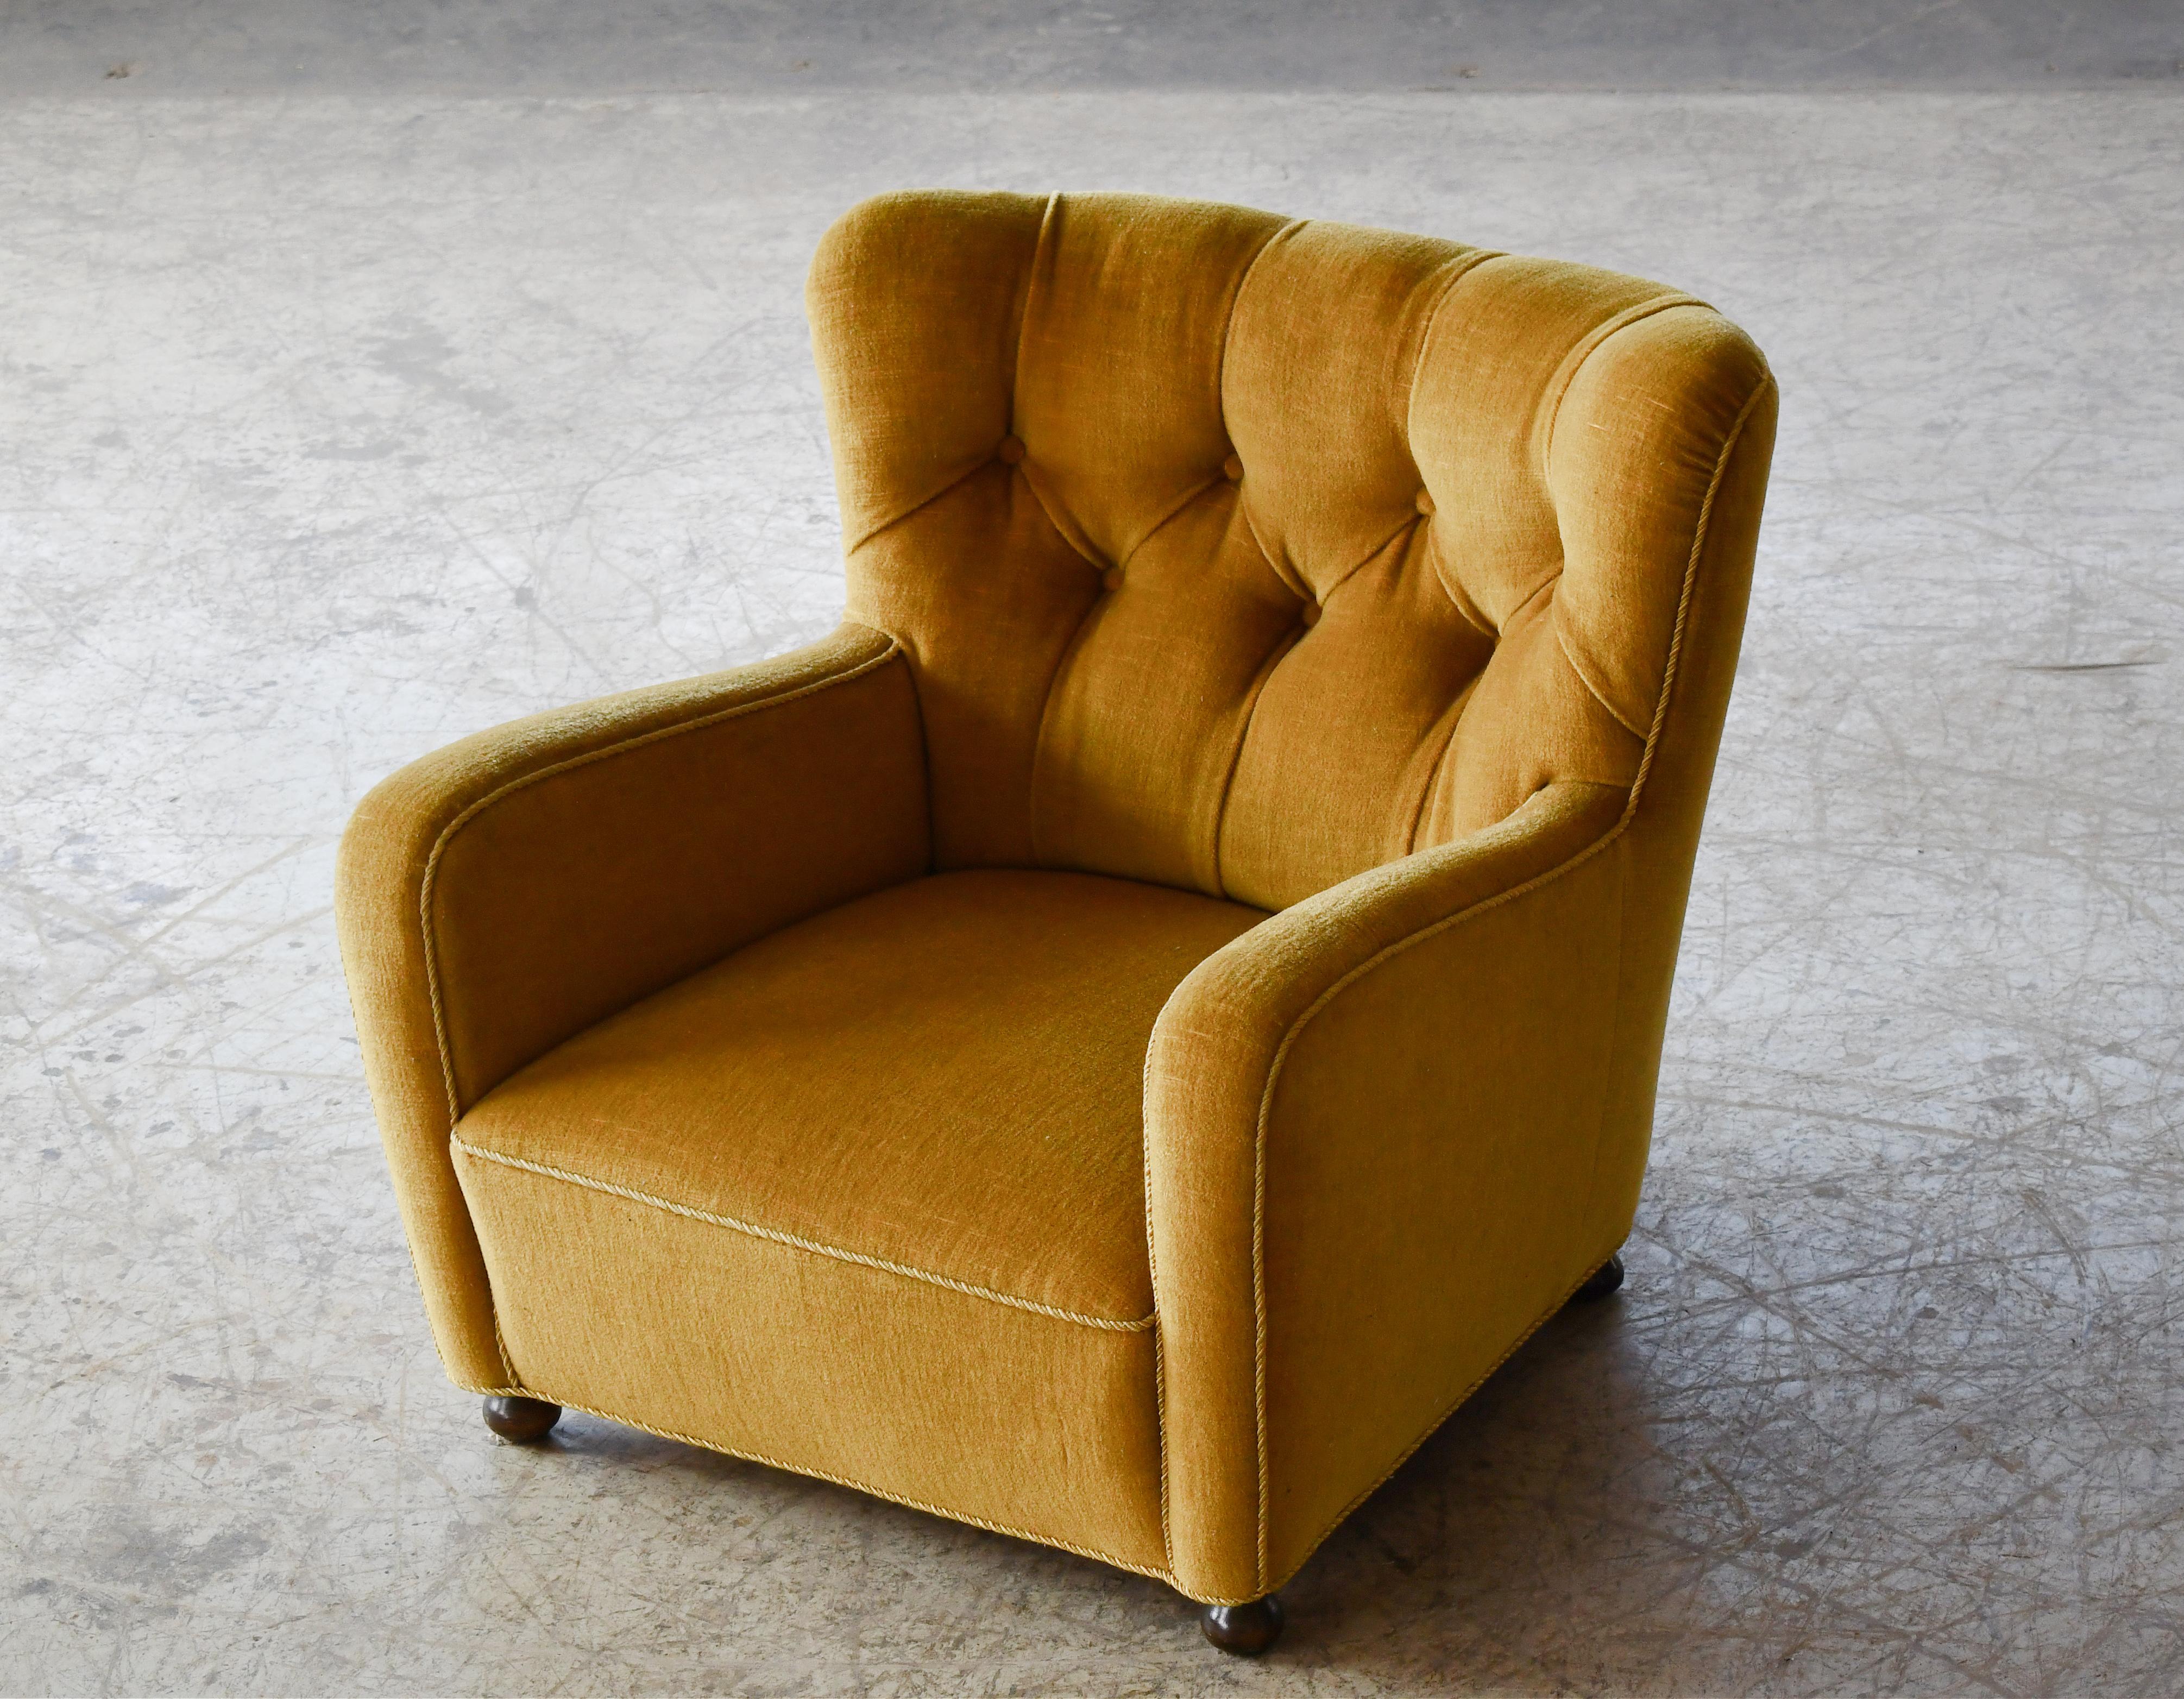 1930-40s Danish Art Deco or Early Midcentury Lounge Chair in Golden Mohair 1